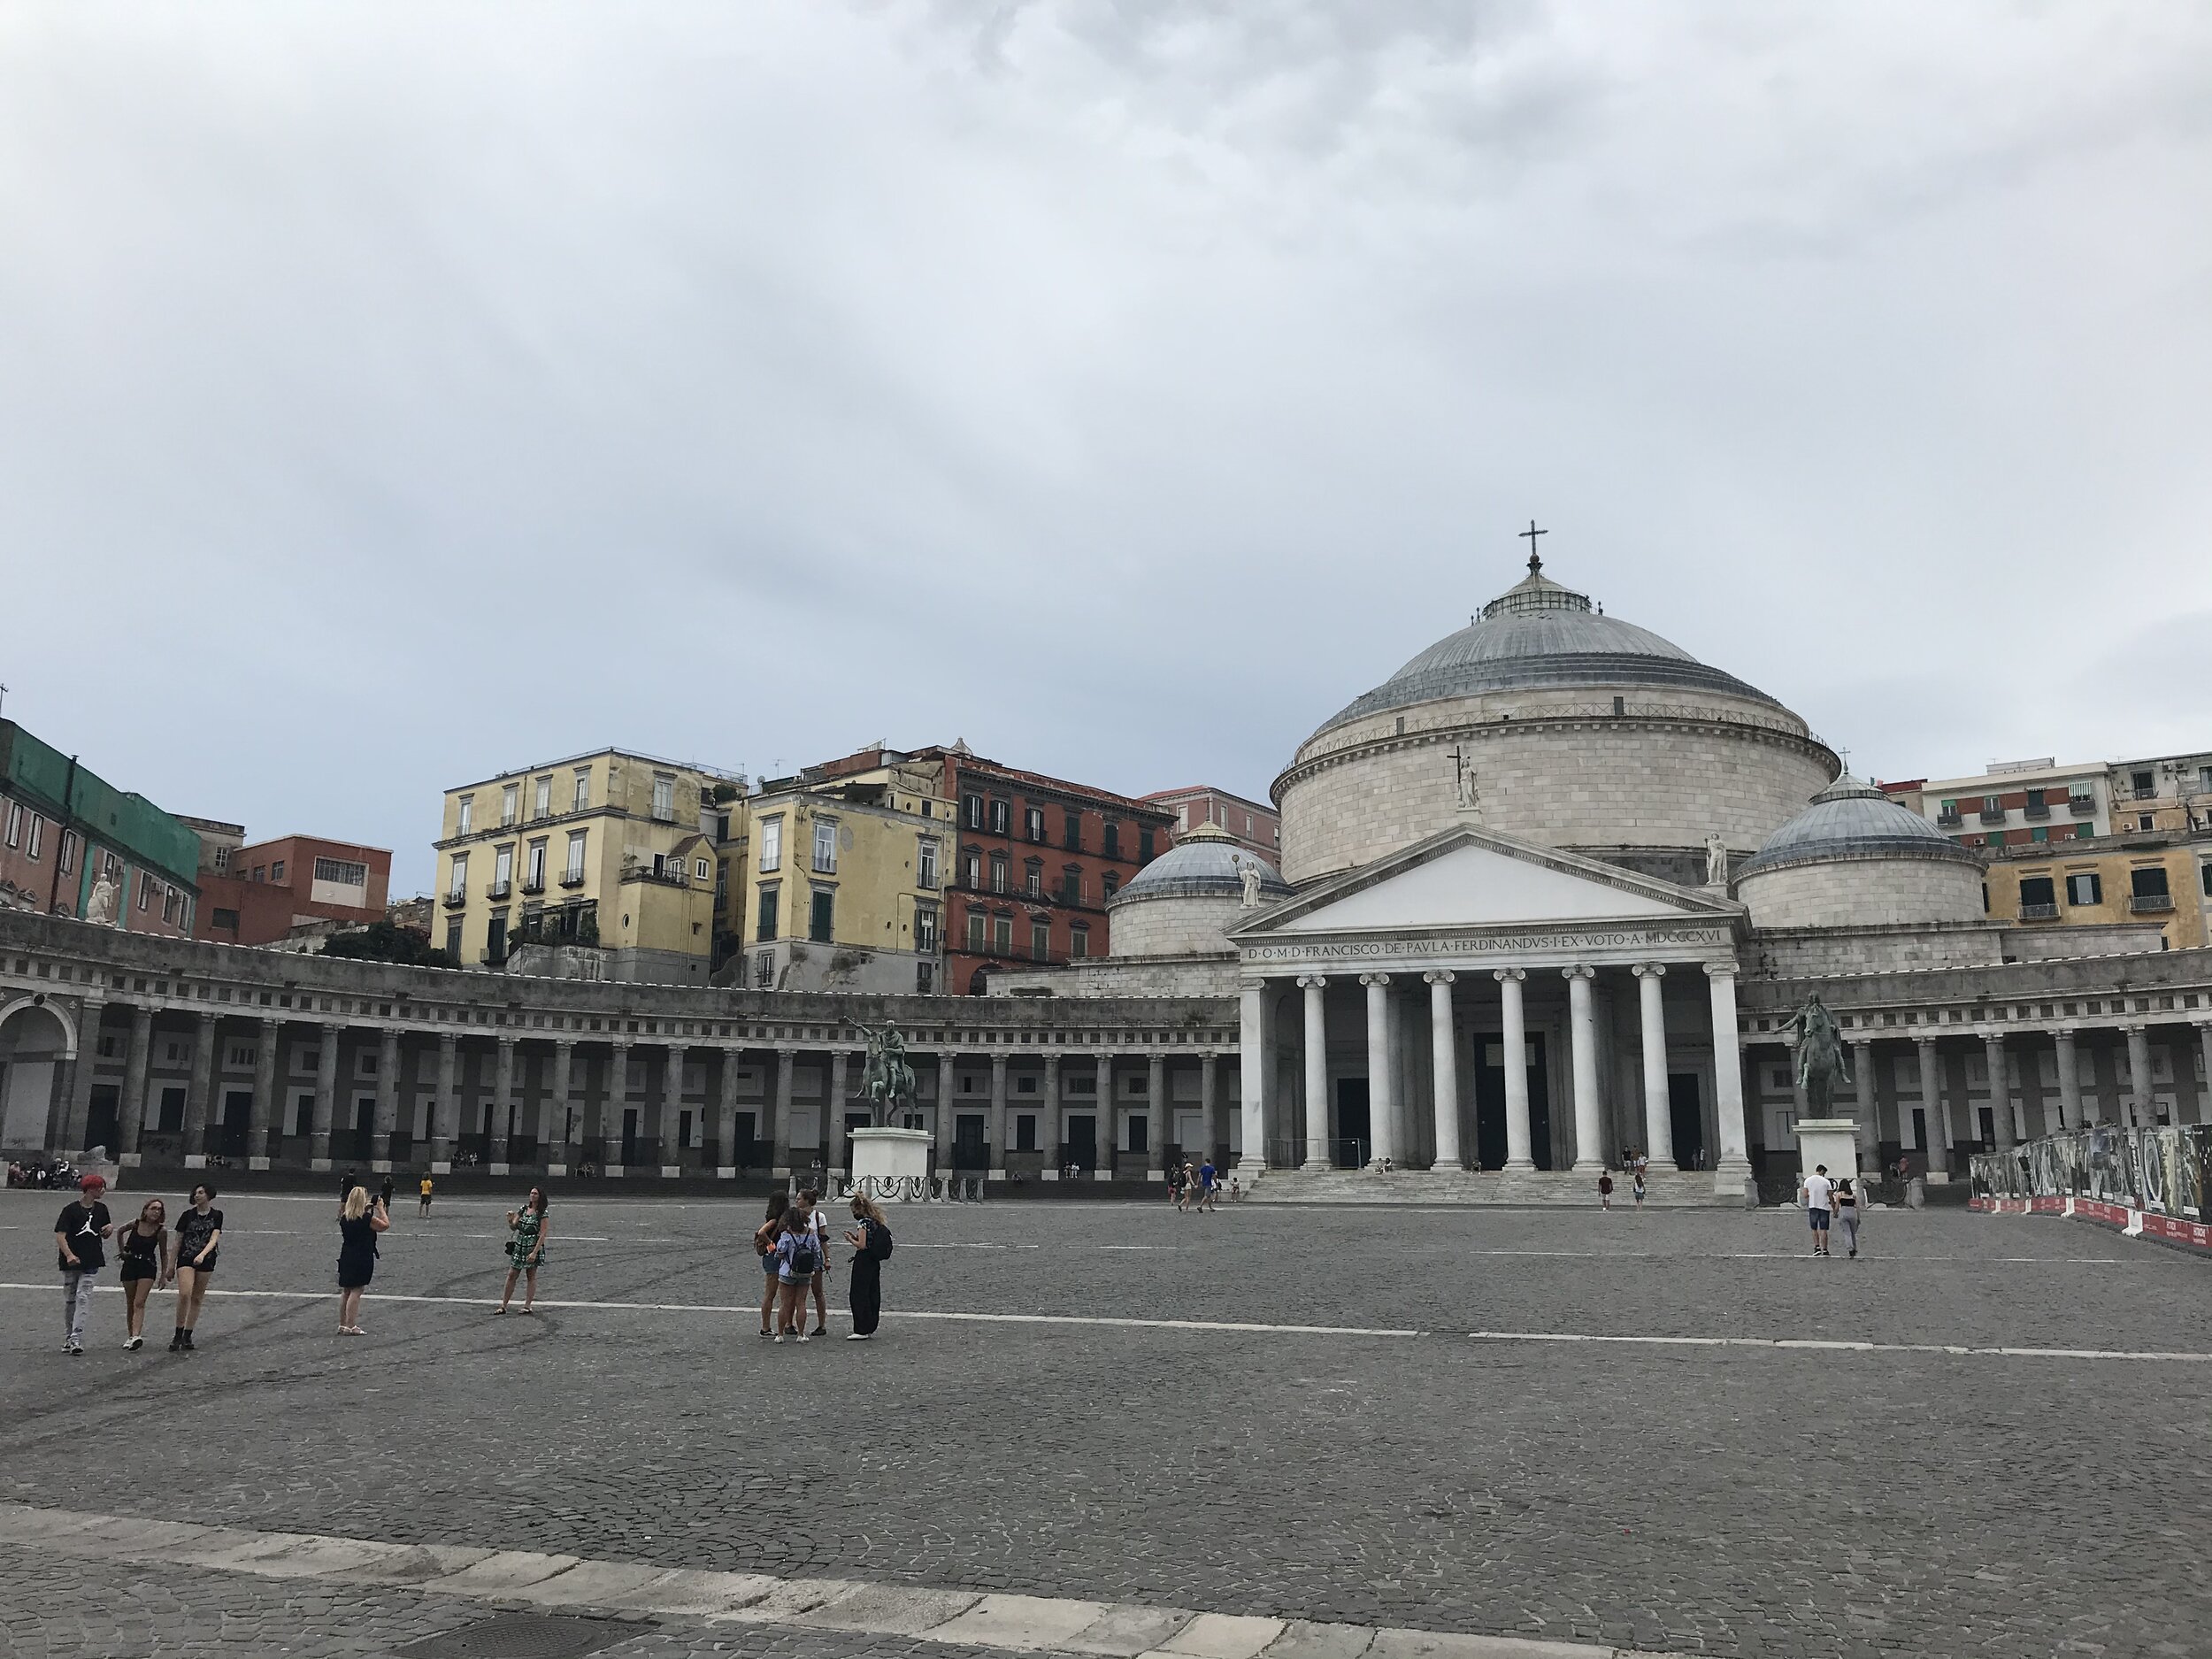   NAPLES, Italy. August 7th, 2020. PICTURED:  Piazza Plebiscito yawns as a church modeled after the Roman Pantheon stares endlessly at the royal palace across the plaza. 